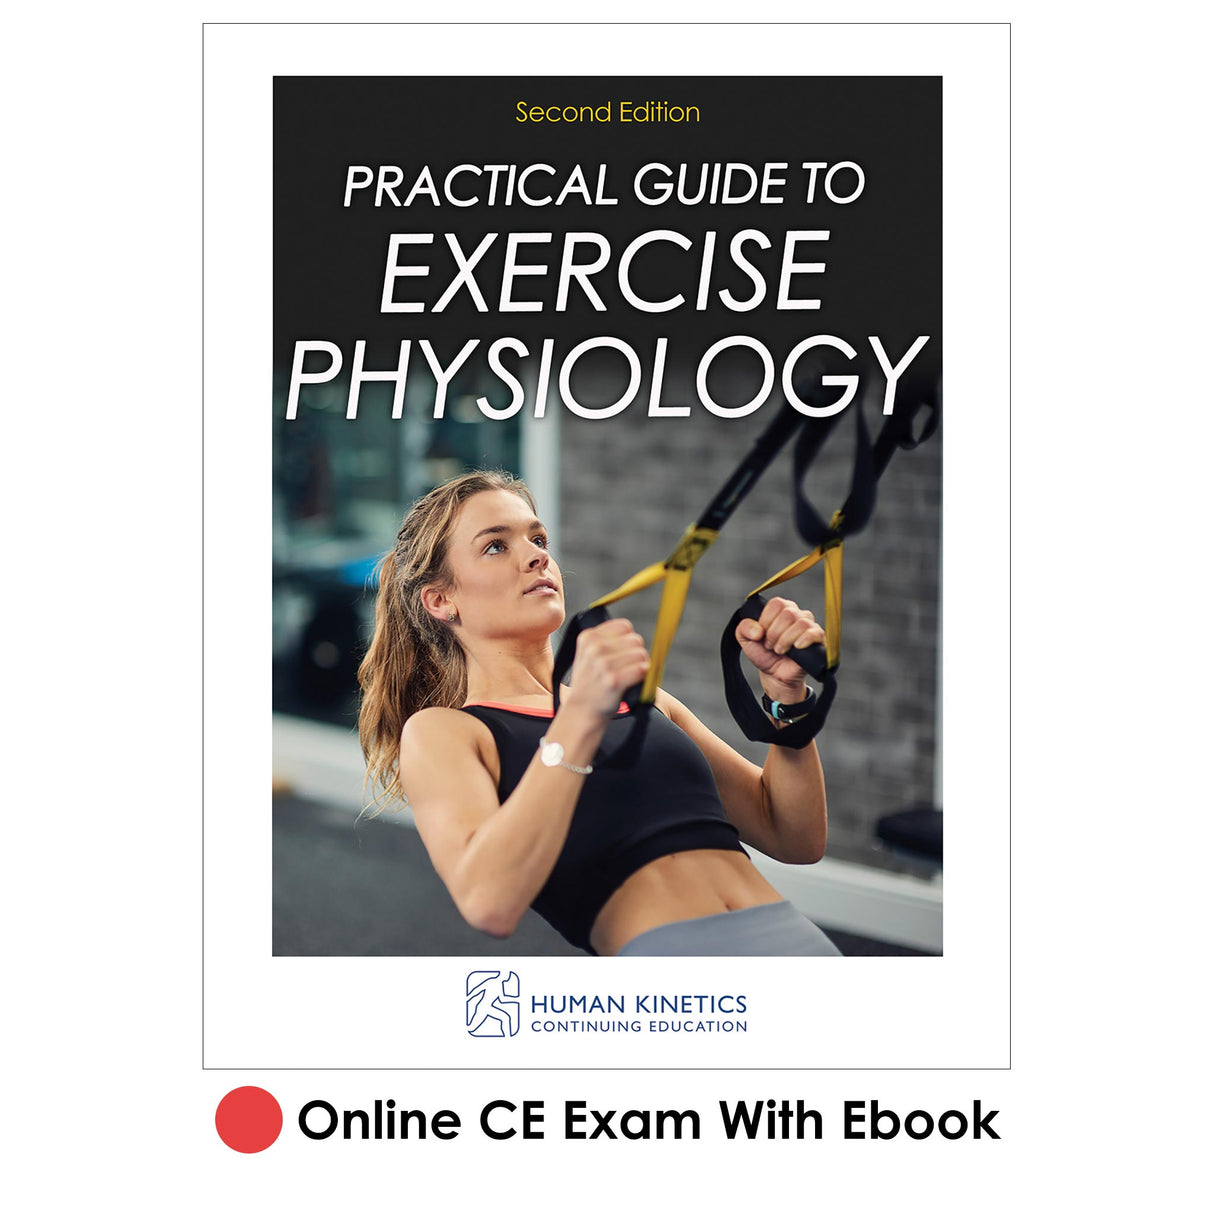 Practical Guide to Exercise Physiology 2nd Edition Online CE Exam With Ebook